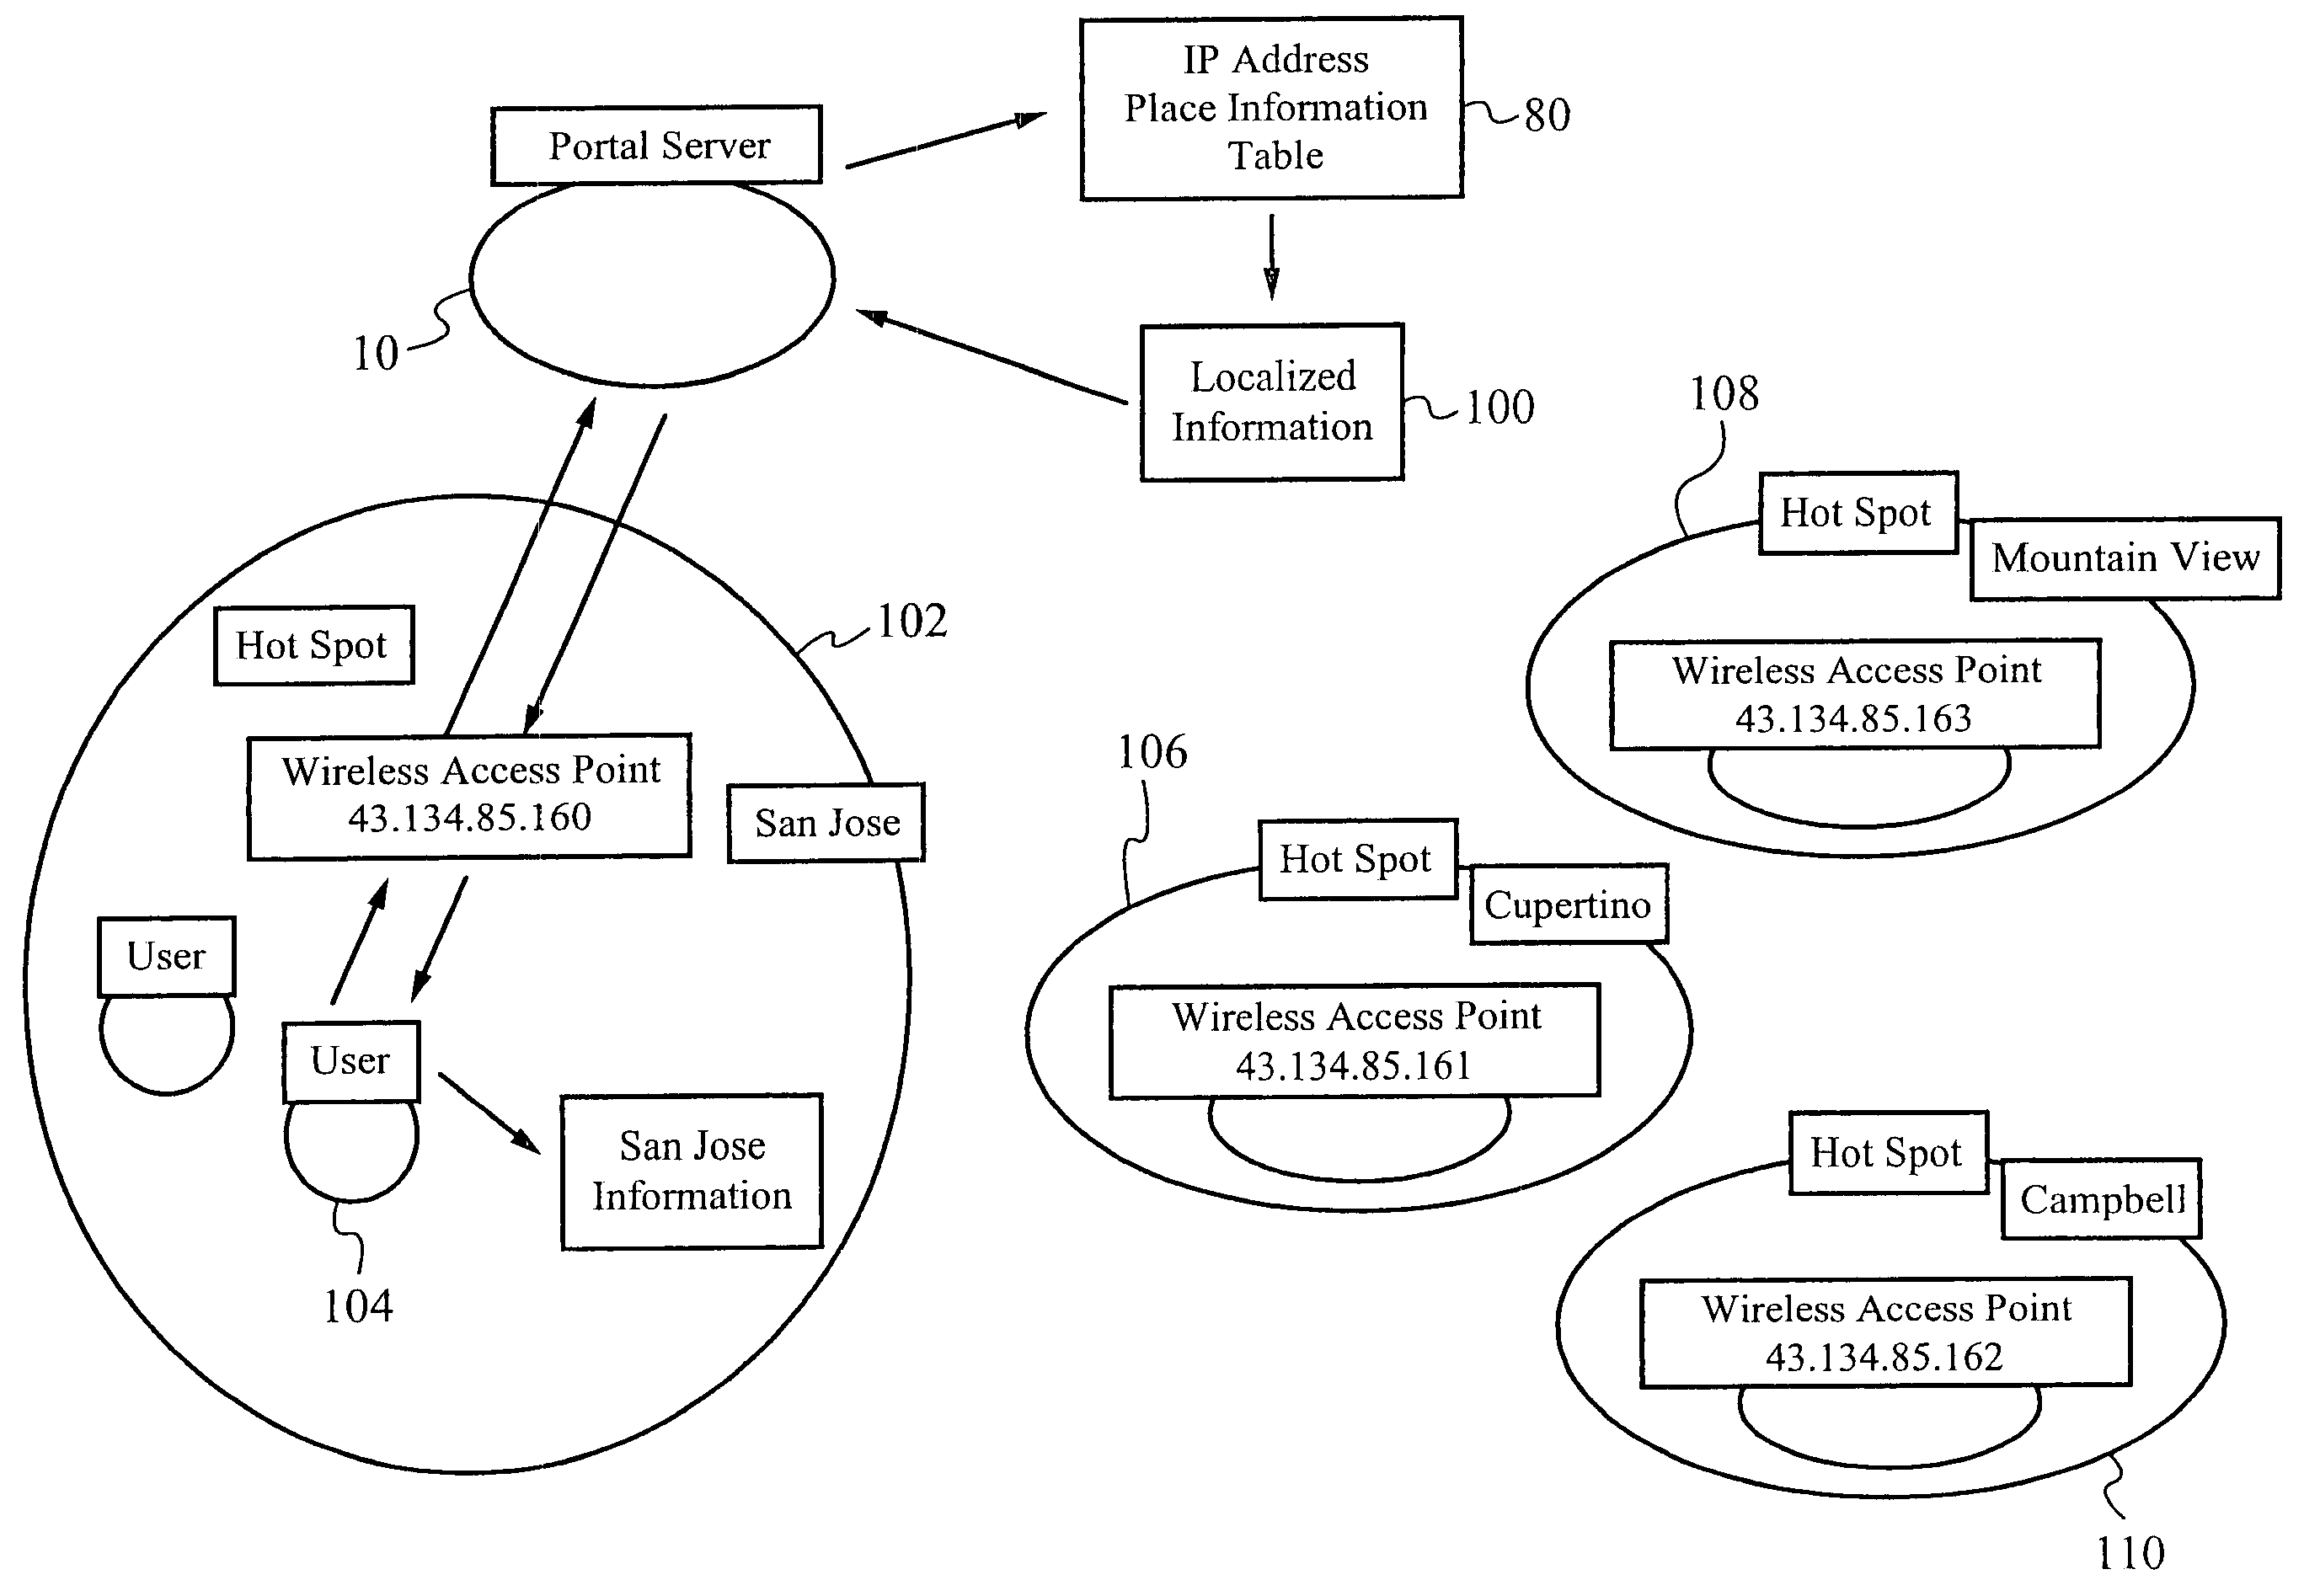 Method of and apparatus for providing localized information from an internet server or portal to user without requiring user to enter location